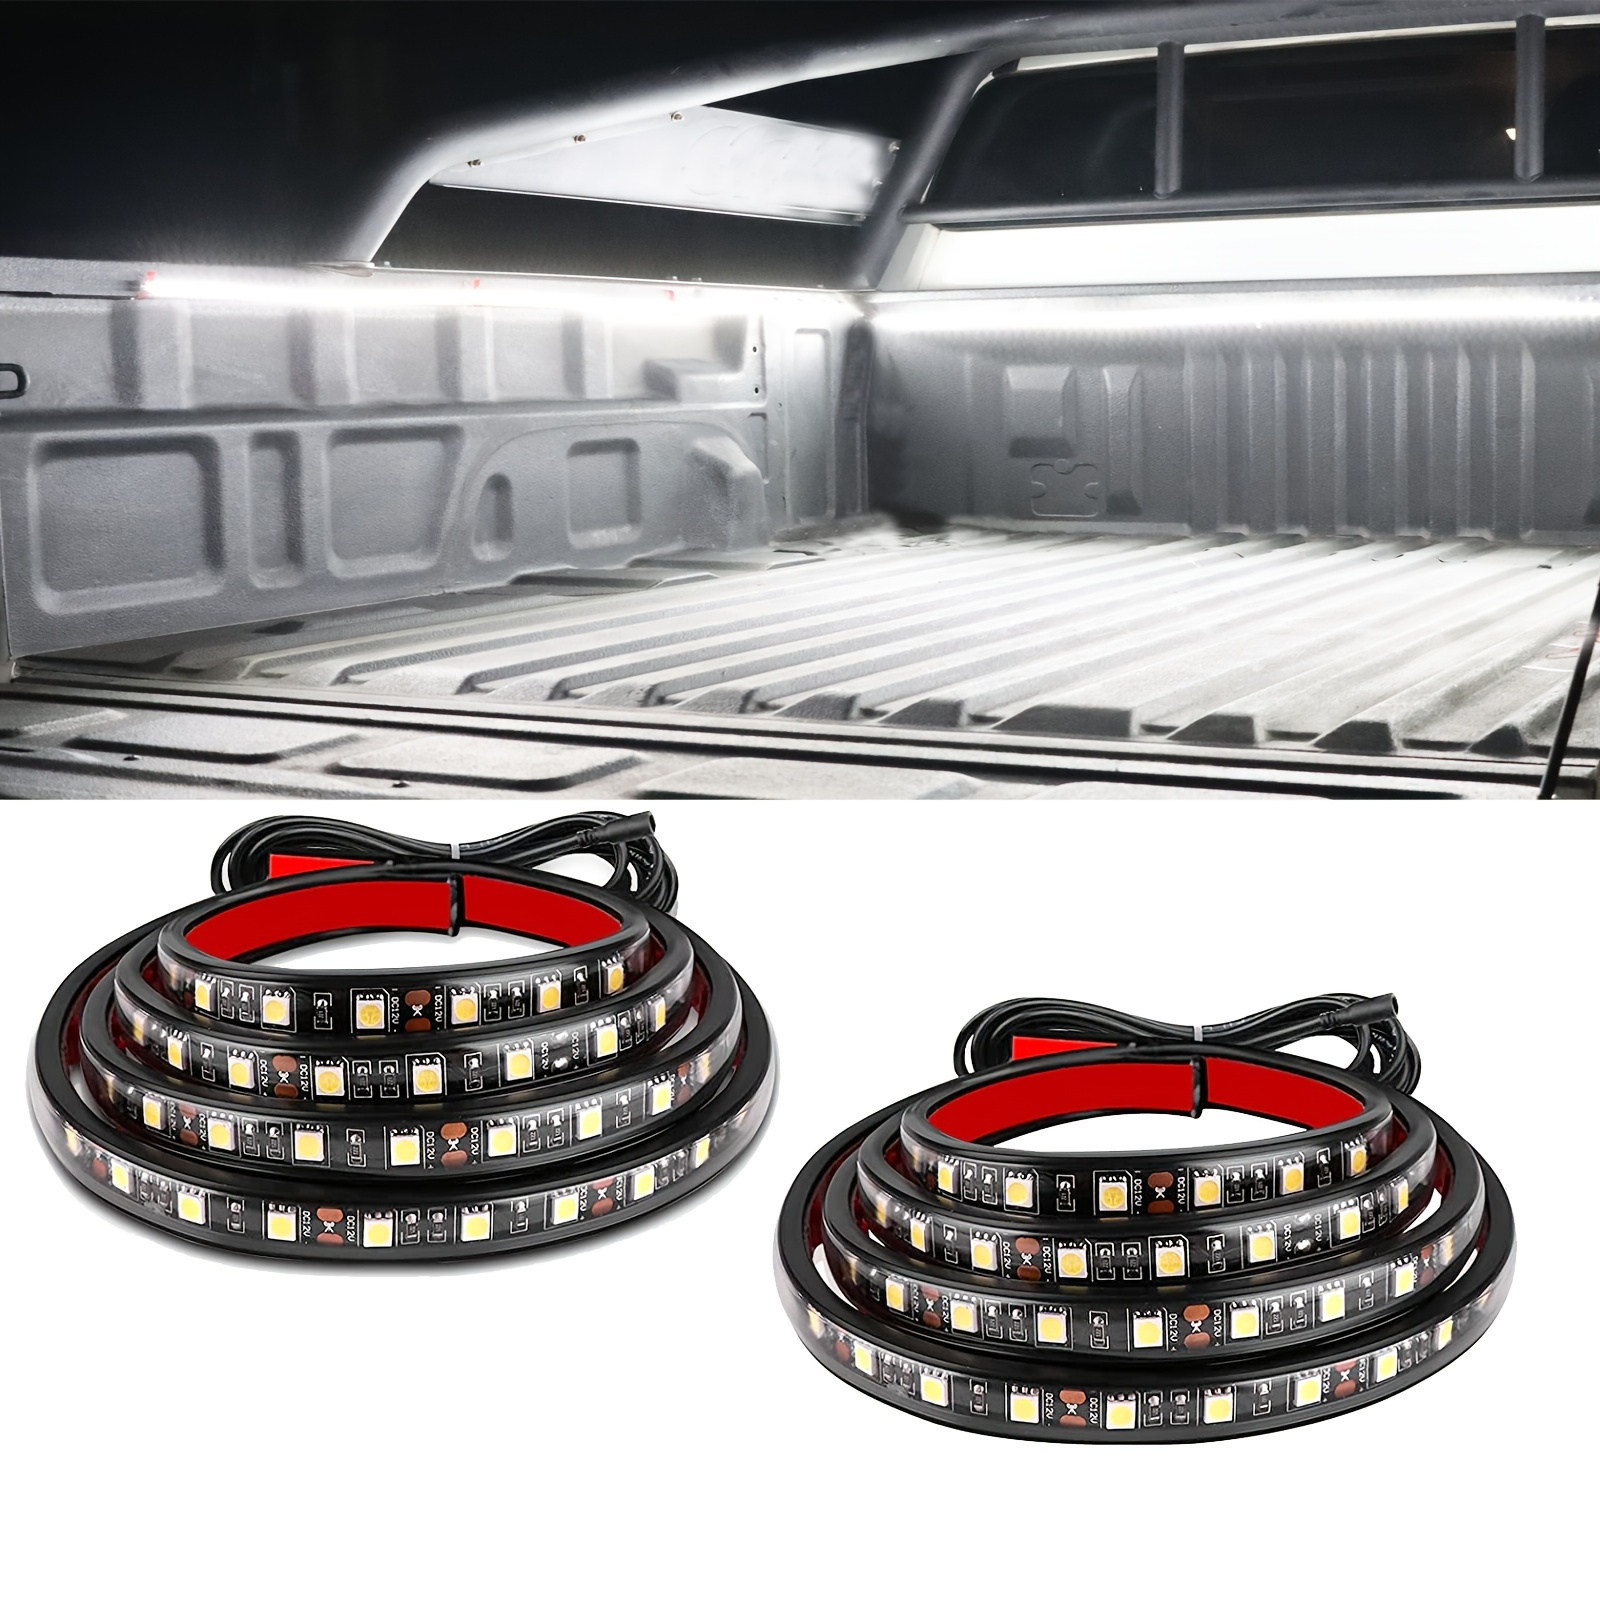 2Pcs 60 Dimming Truck Bed Led Light Strip White for Ford Dodge Chevy